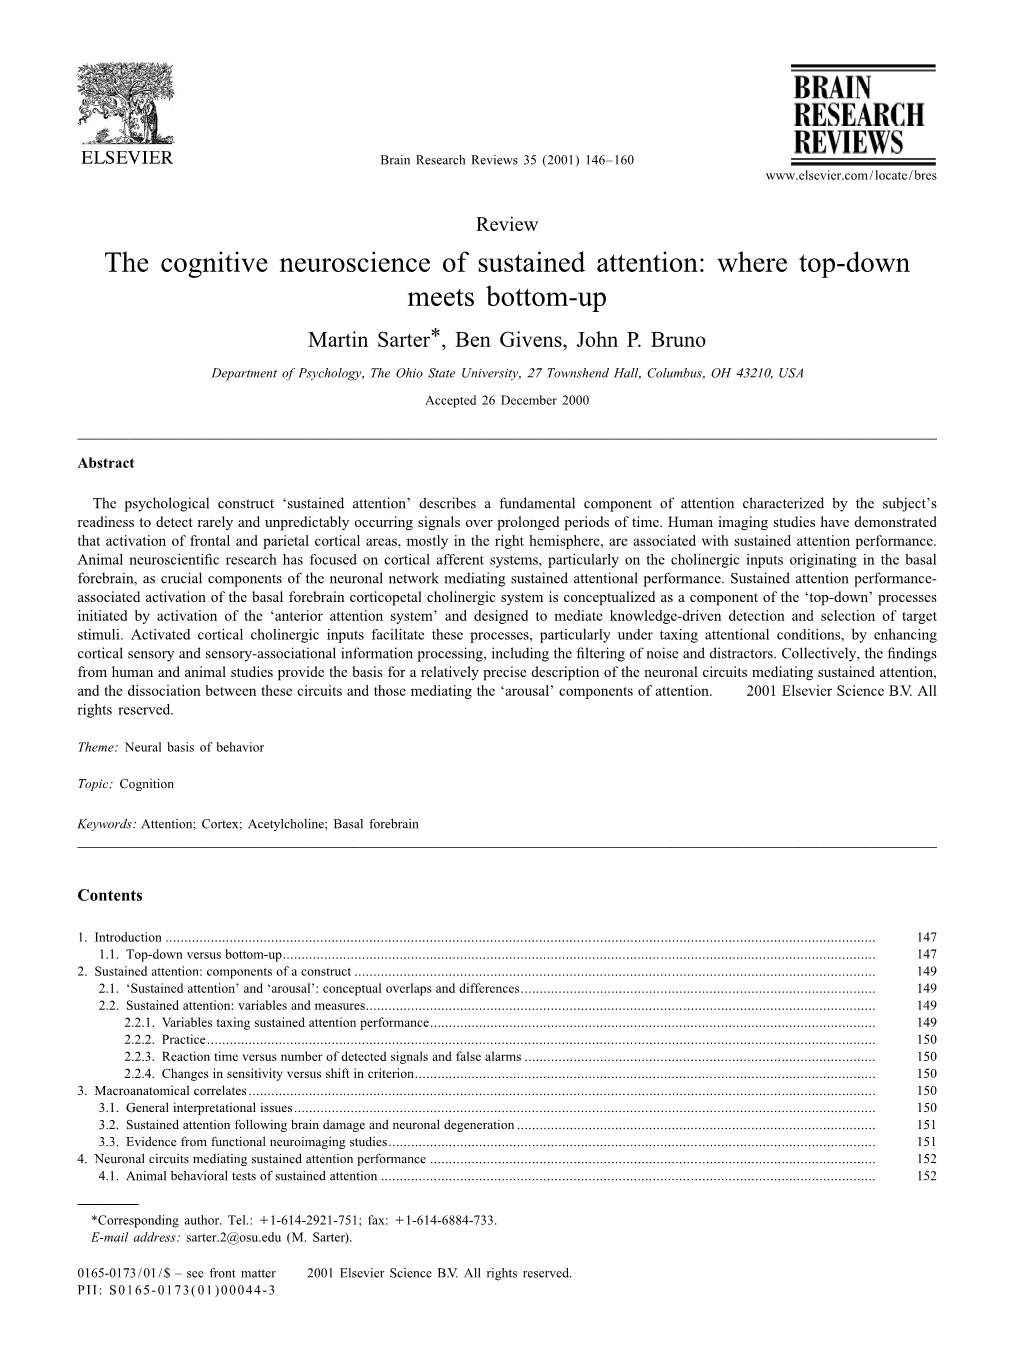 The Cognitive Neuroscience of Sustained Attention: Where Top-Down Meets Bottom-Up Martin Sarter* , Ben Givens, John P